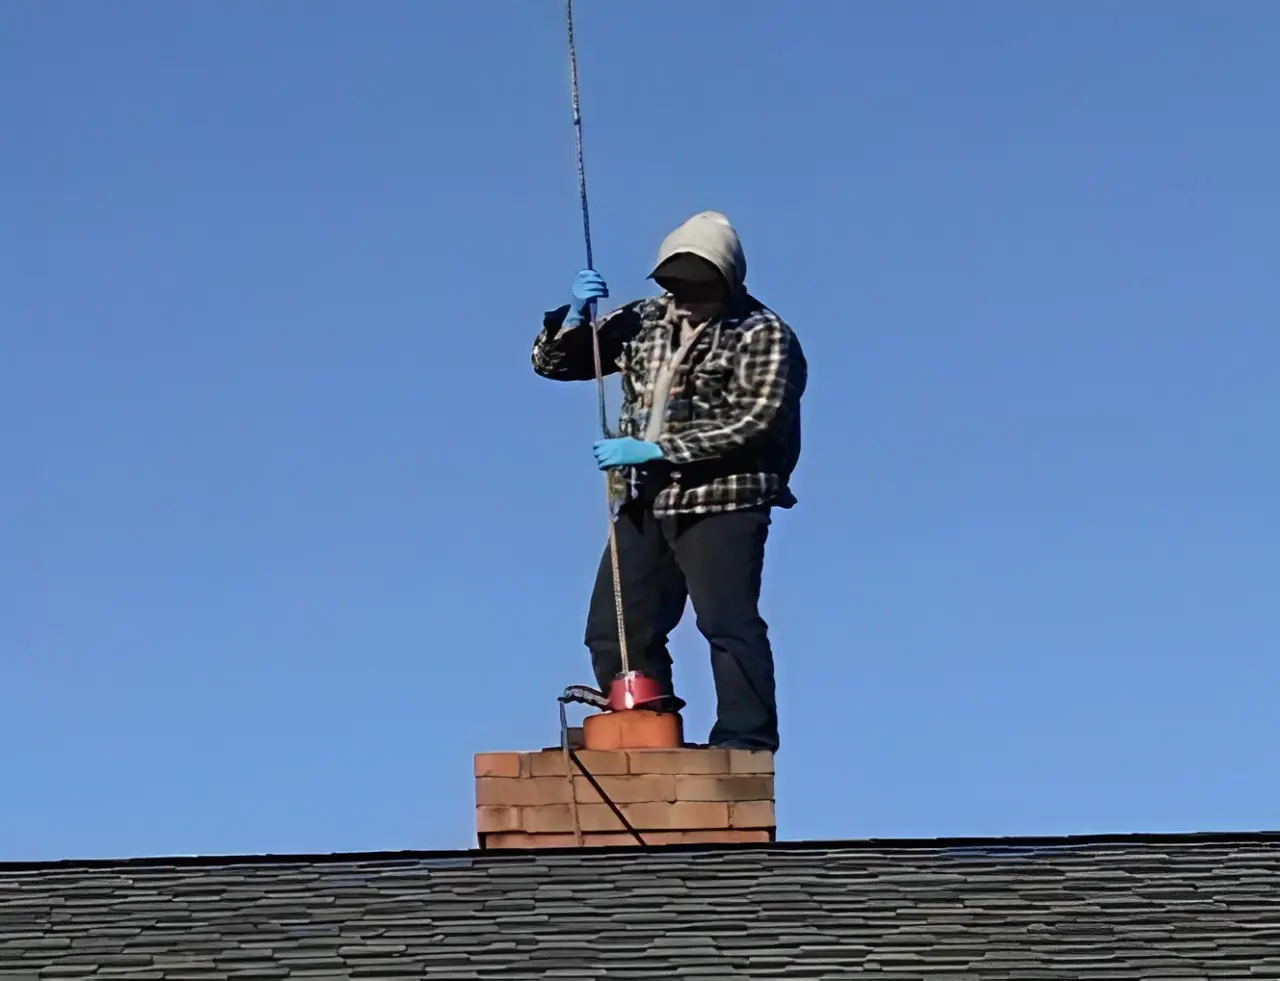 A man is on top of the roof